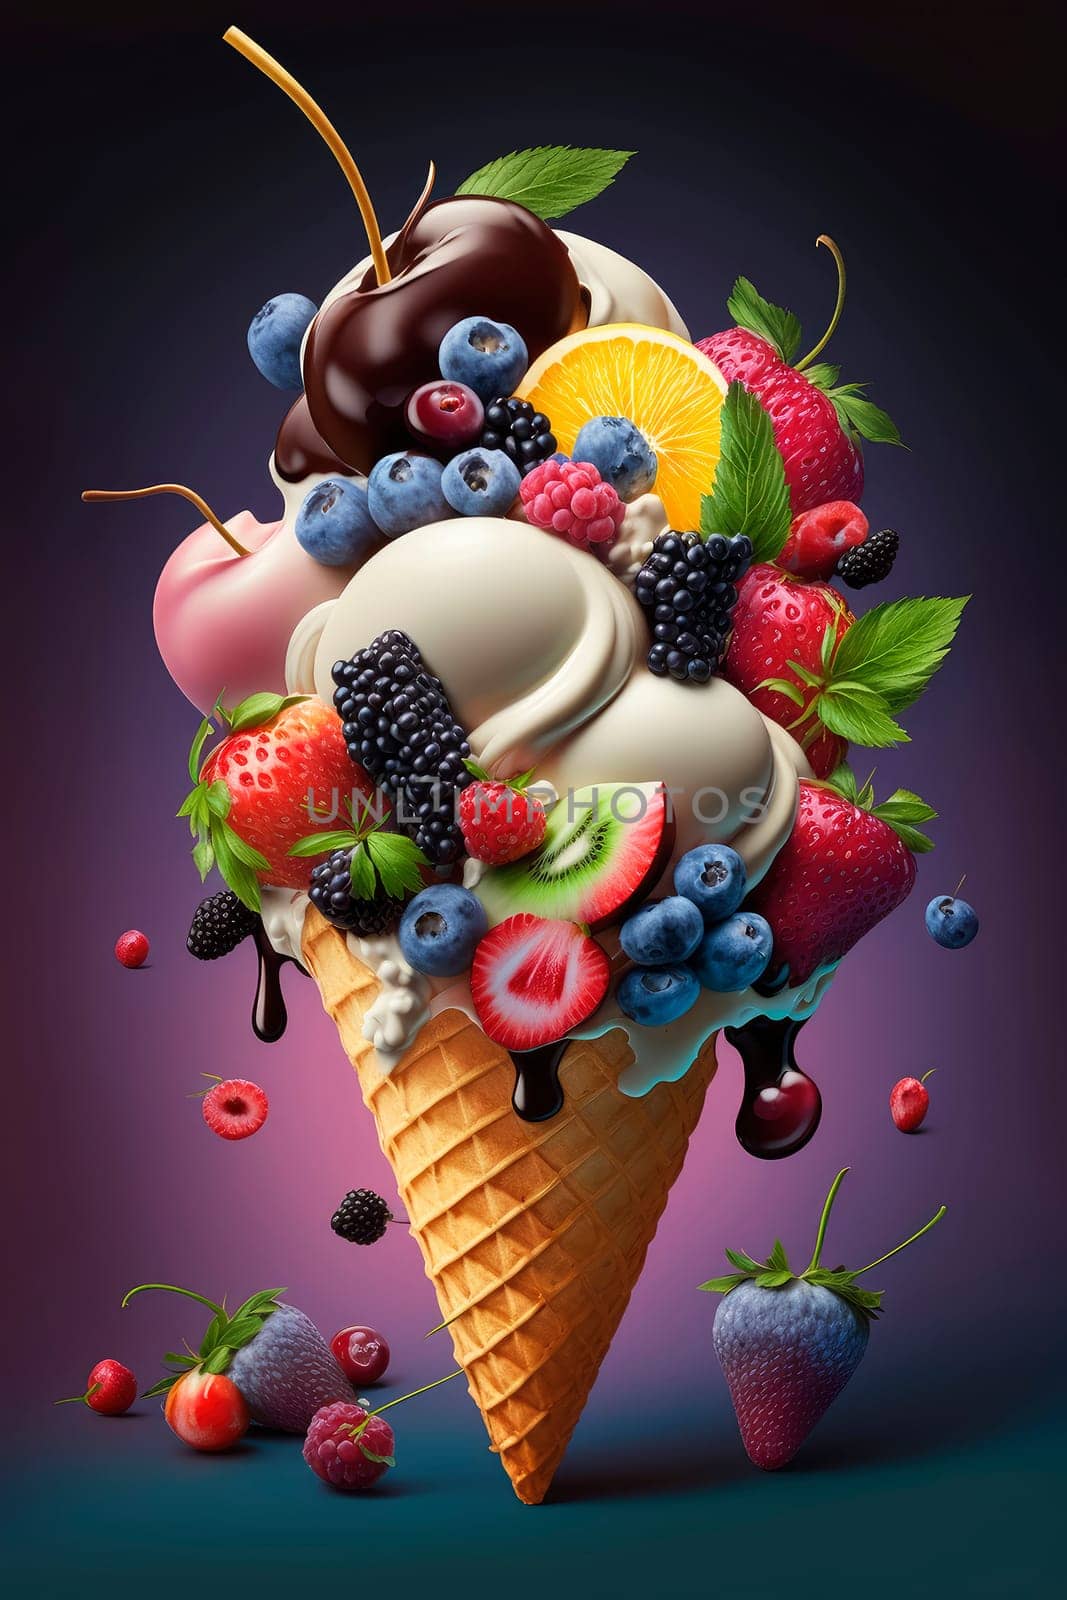 Ice cream cone with berries and fruits. by yanadjana